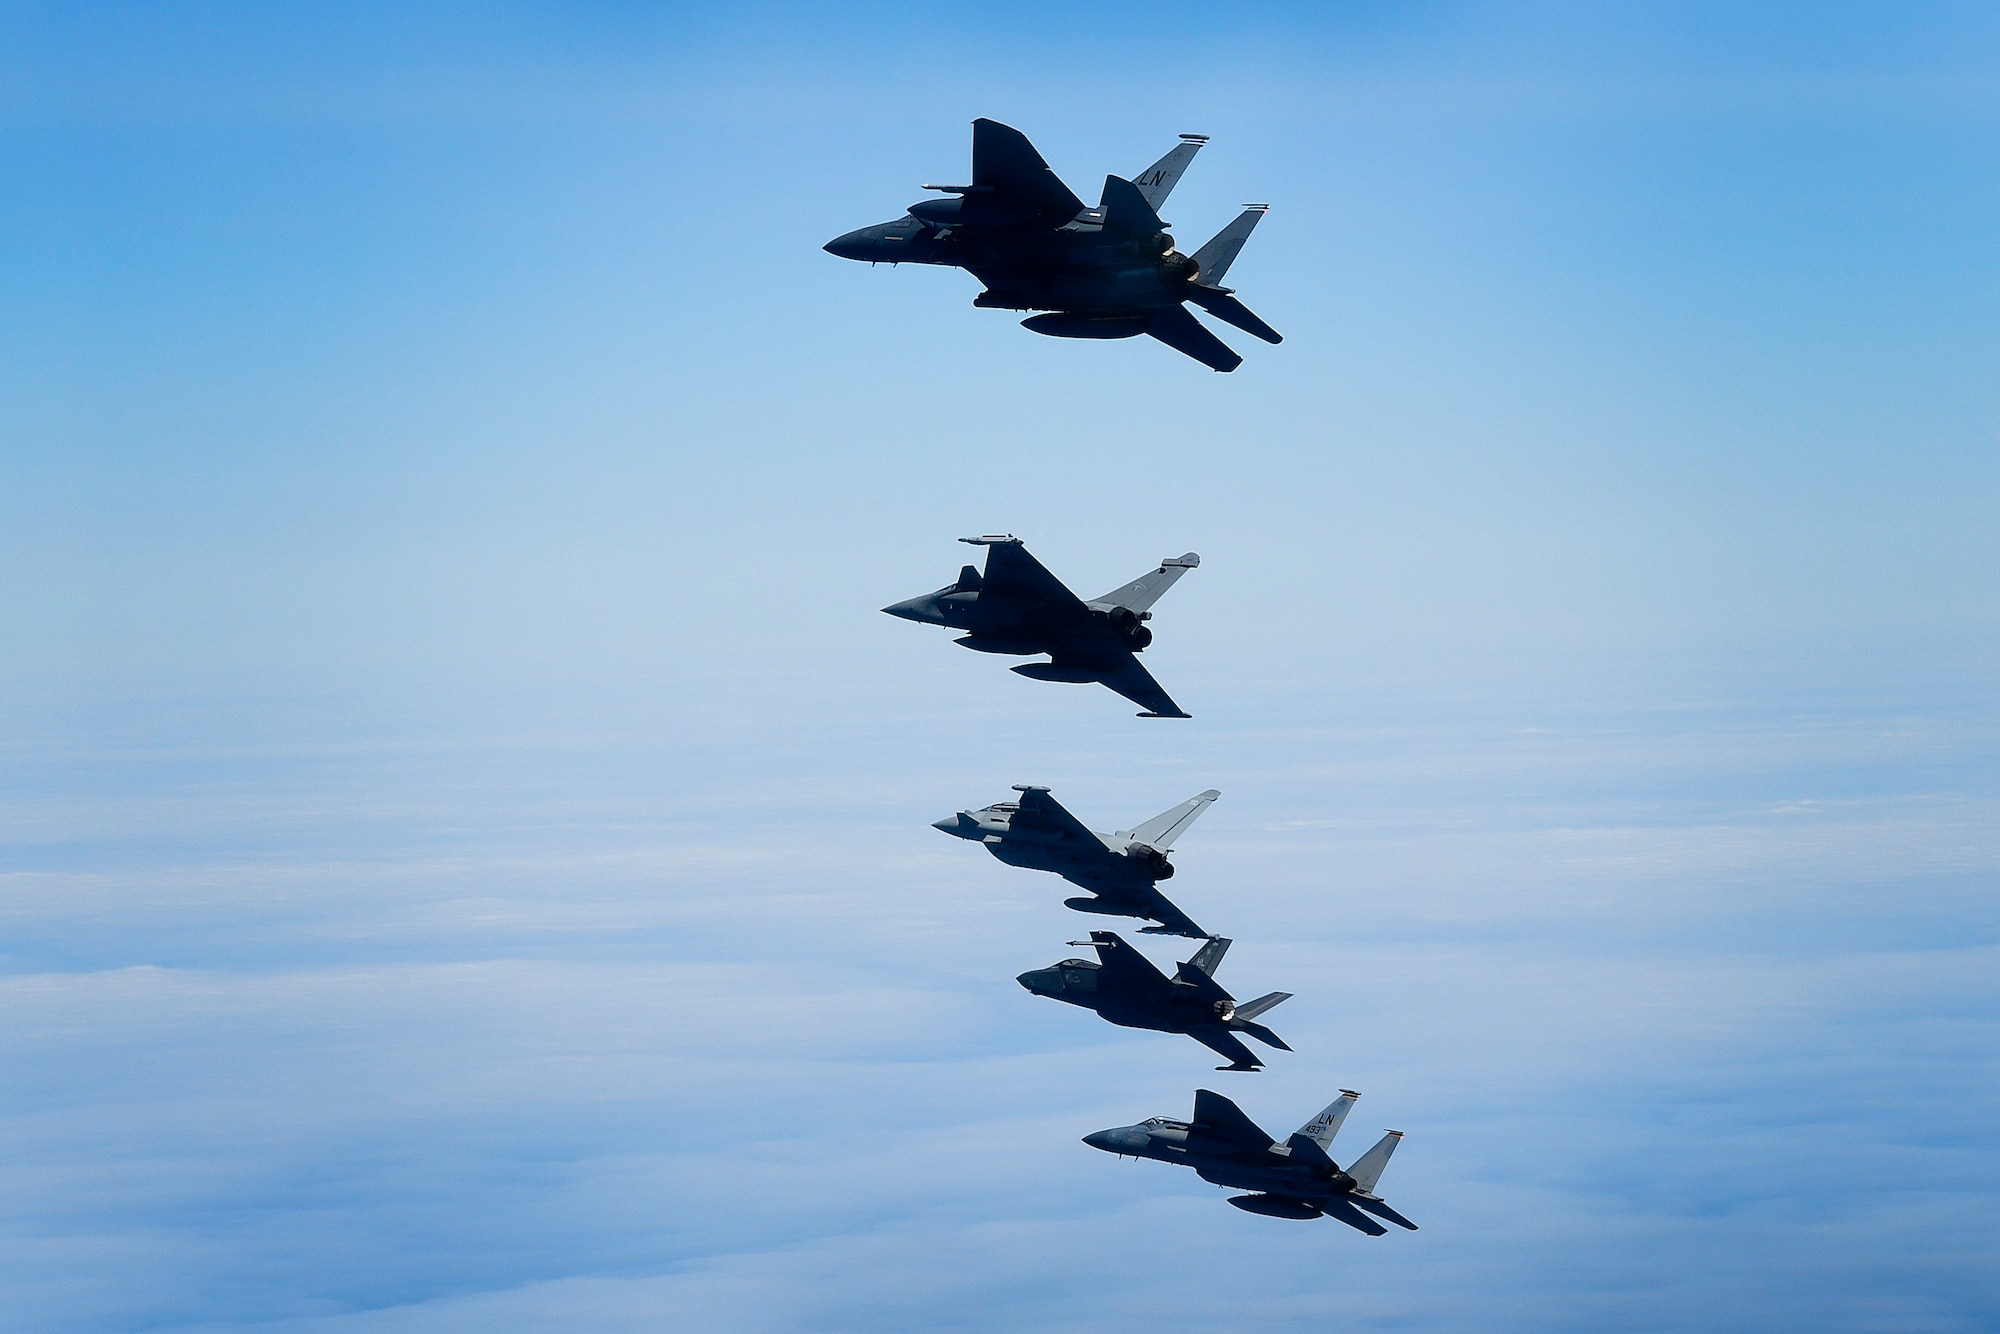 U.S. Air Force fourth and fifth-generation aircraft fly in an echelon formation with a Royal Air Force Typhoon and a French Rafale in support of exercise Pointblank 19-2, over the North Sea, June 27, 2019. The objective of the exercise is to prepare coalition warfighters for a highly contested fight against near-peer adversaries by providing a multi-dimensional battle-space to conduct advanced training in support of US, UK and French national interests. (U.S. Air Force photo/ Tech. Sgt. Matthew Plew)